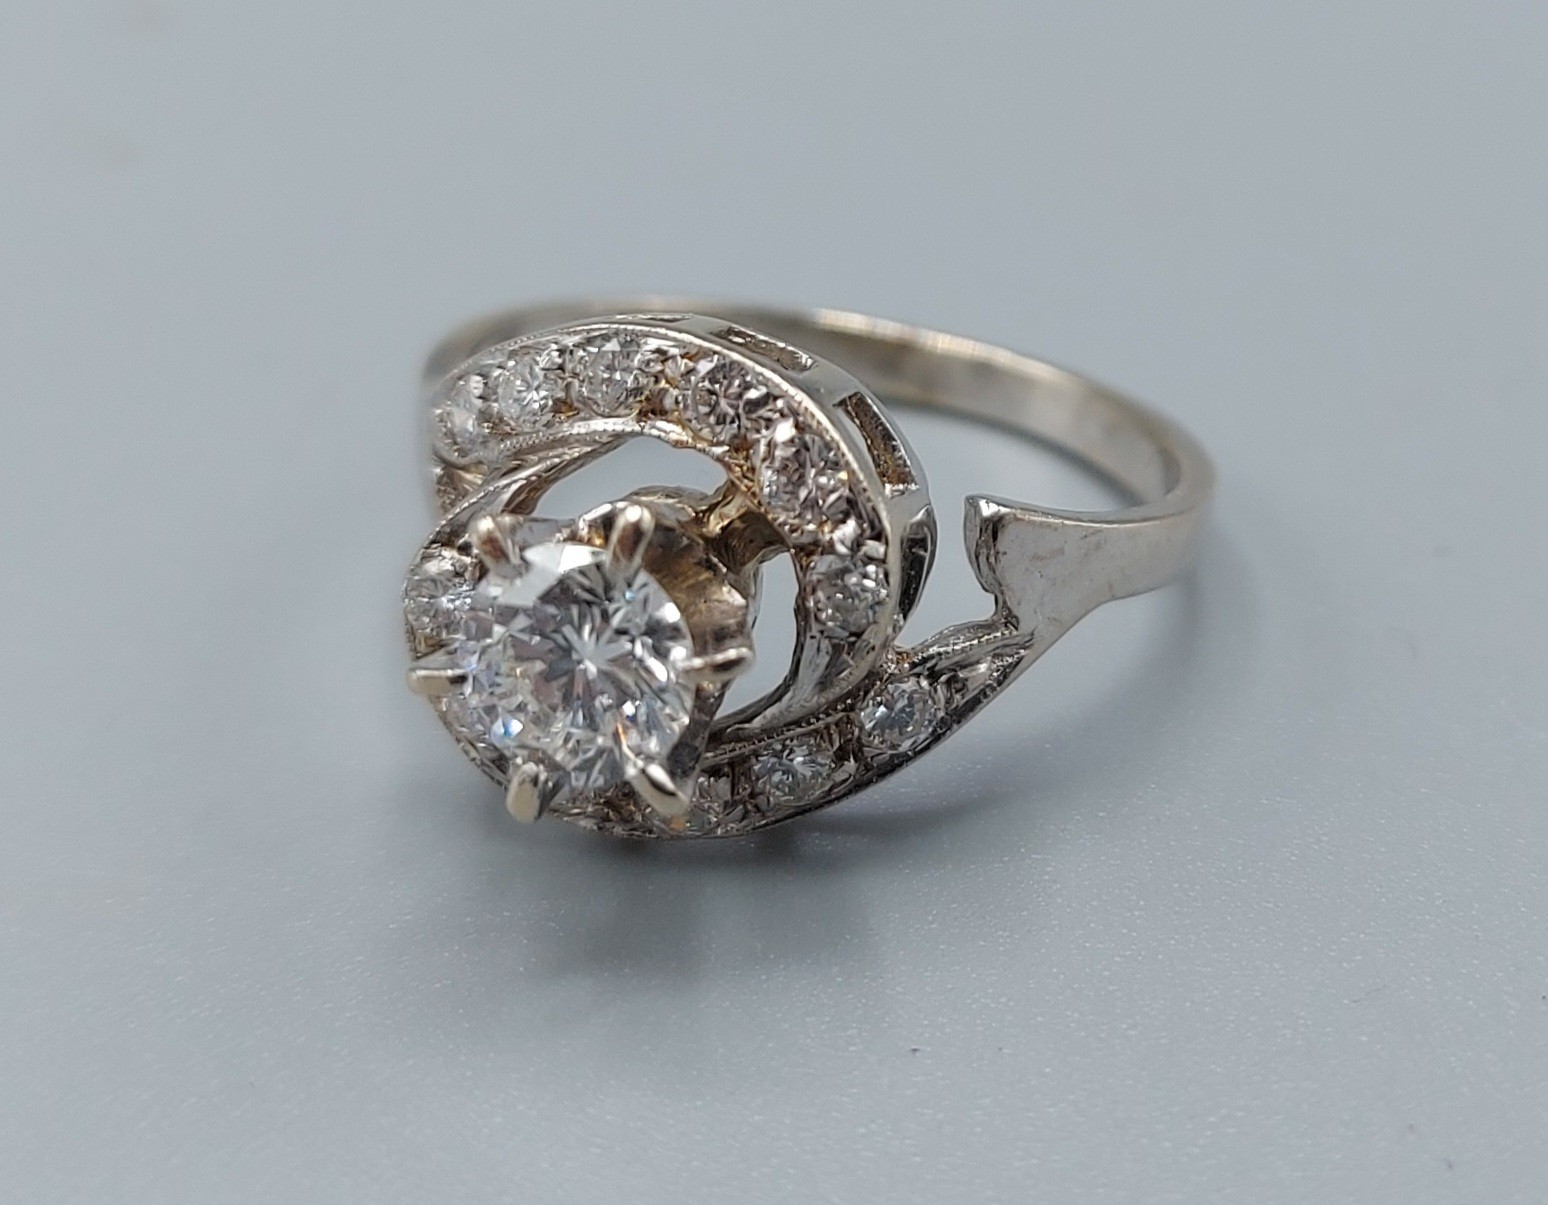 An 18ct white gold diamond cluster ring, the central diamond approx. 0.50ct surrounded by smaller